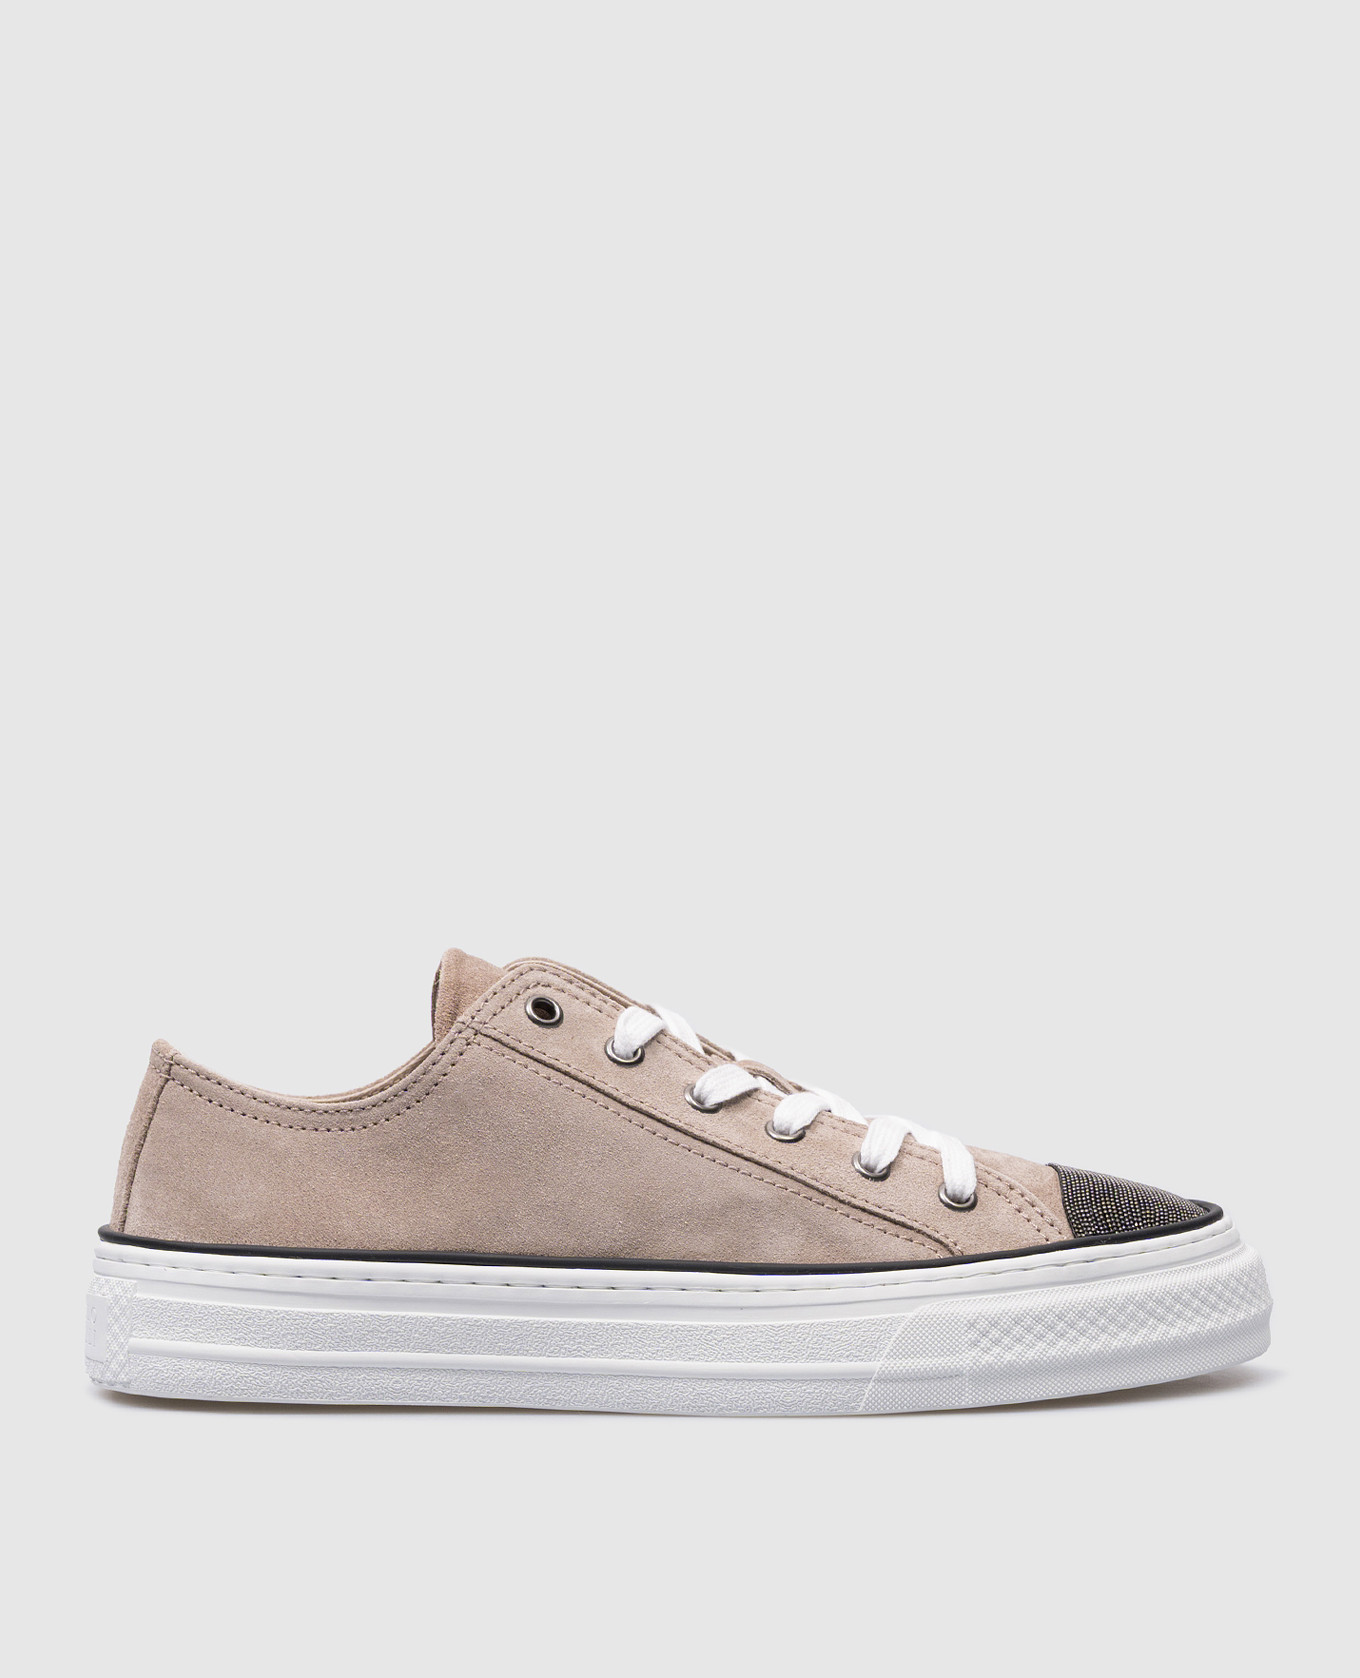 Beige suede sneakers with monil chain